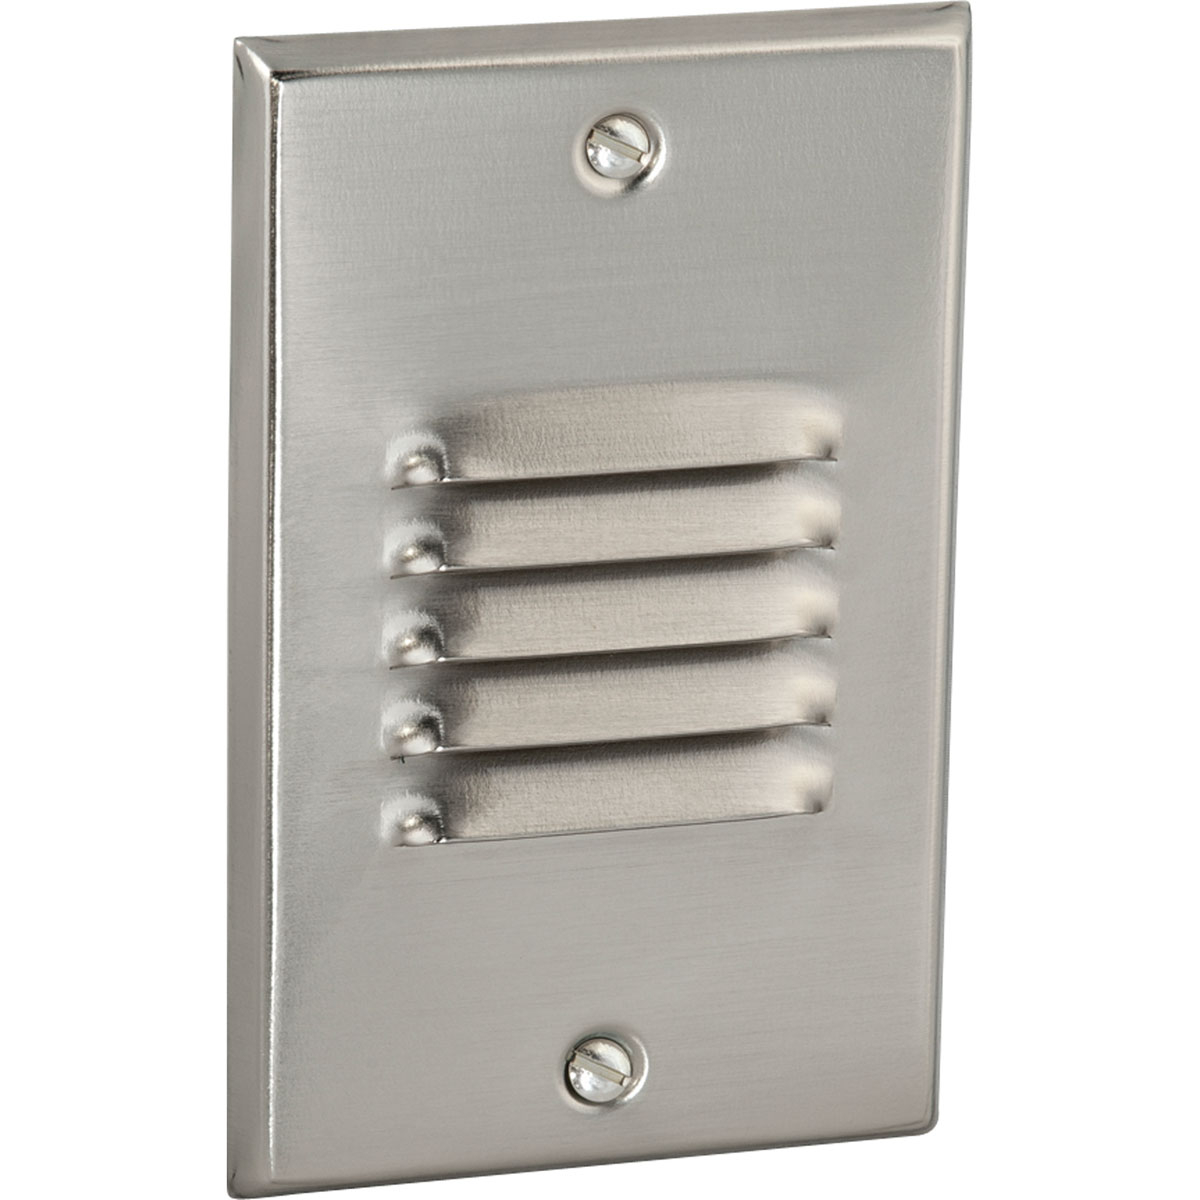 The 5w, 3000K step light/wall lights is a vertical louvered mount that mounts in a single-gang wall box. 84+ CRI and 120 degree beam spread. Wet location listed so can be used indoor or outdoors. Brushed Nickel finish.